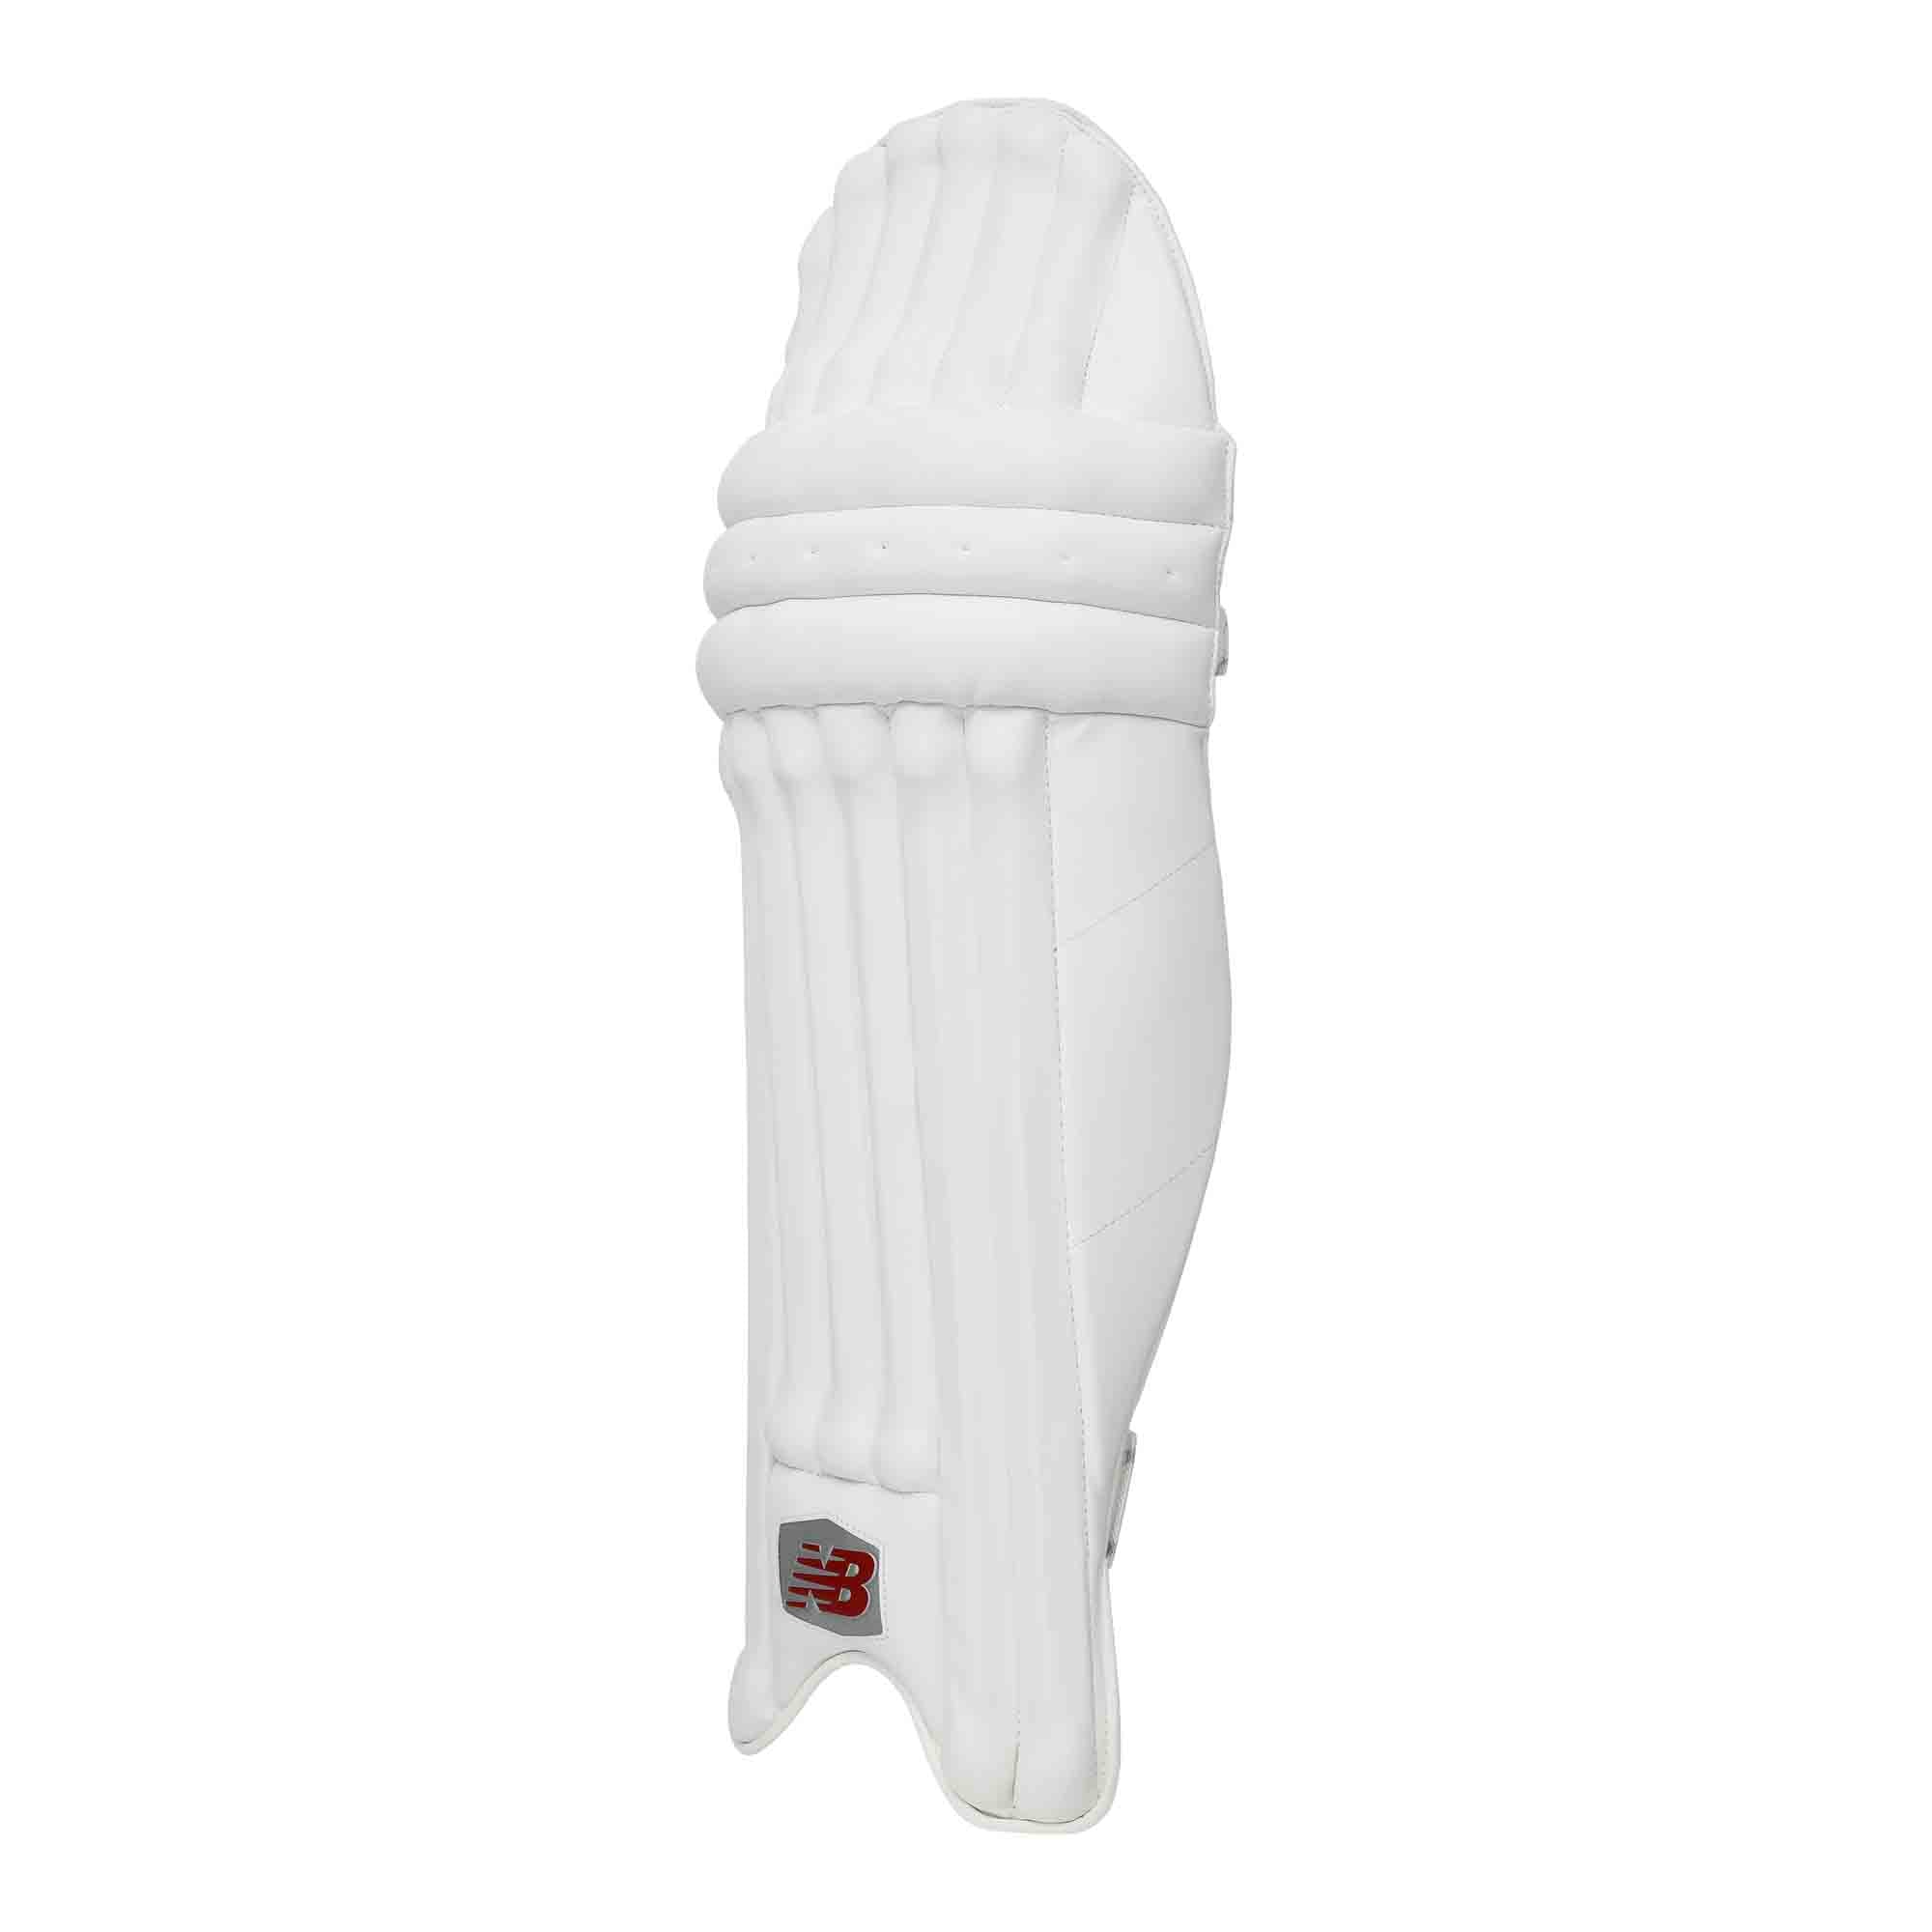 24 TC 660 Cricket Batting Pad from Stagsports store